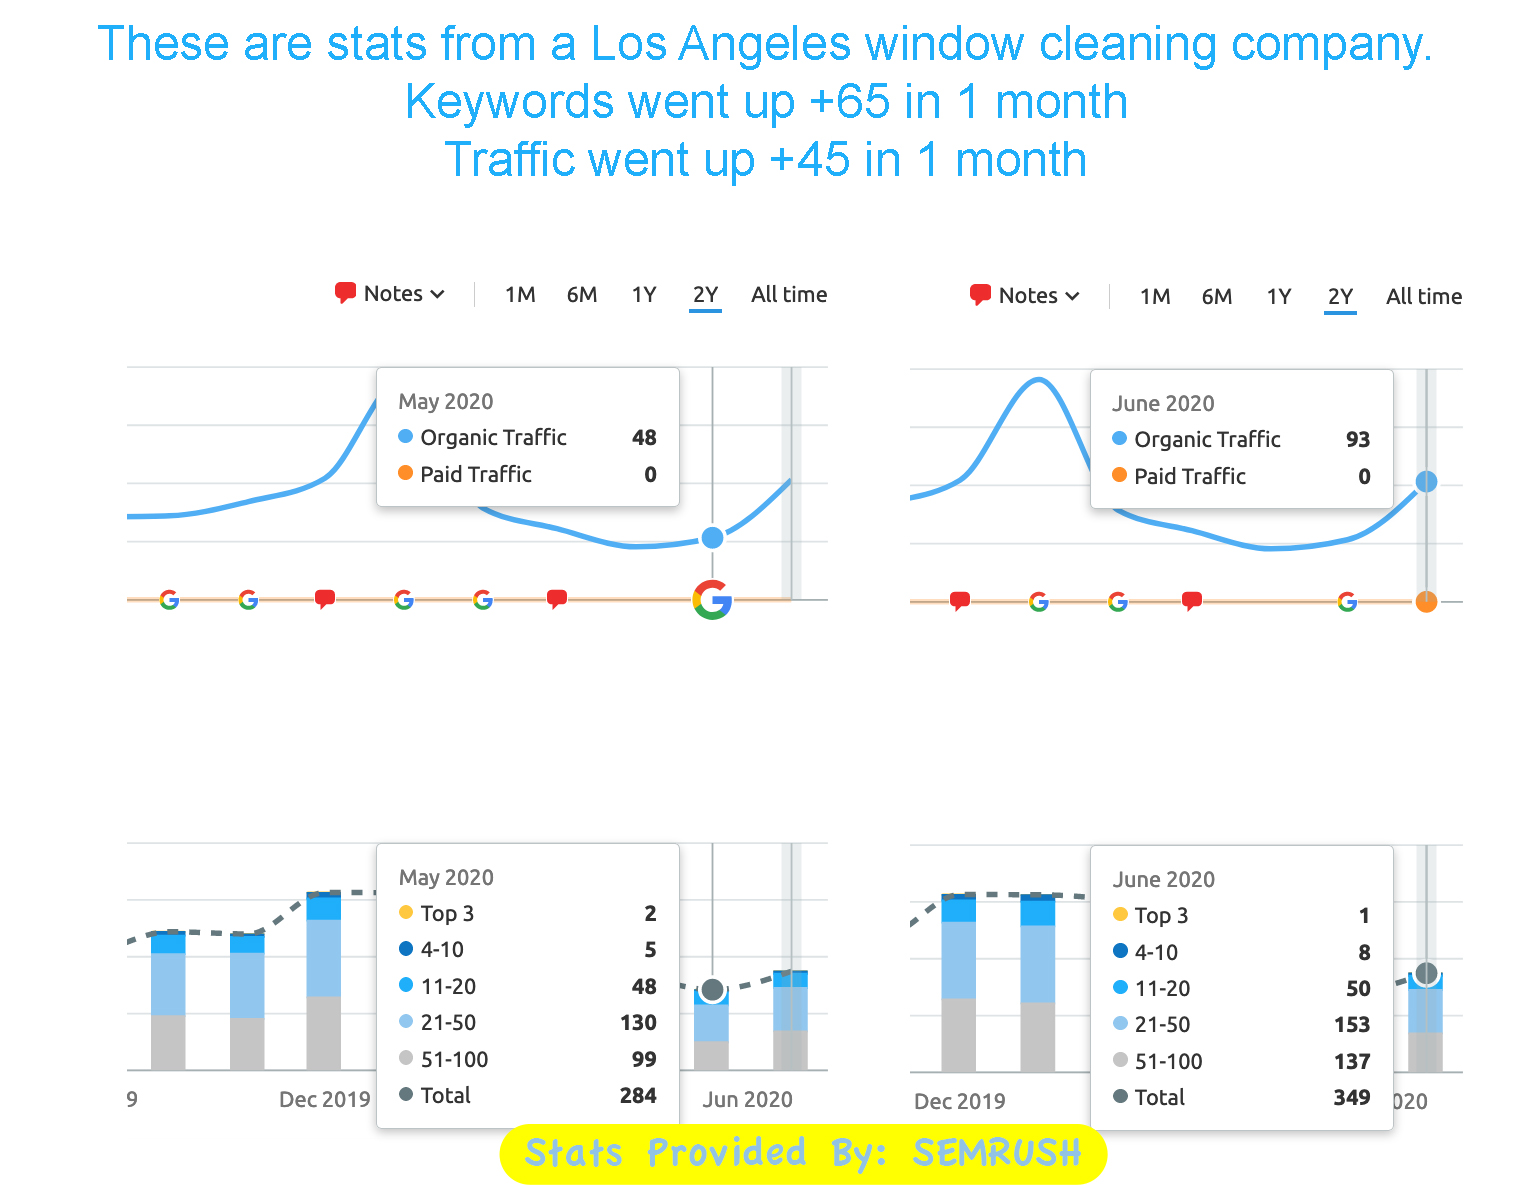 SEO Services for Window Cleaners and Window Cleaning Companies